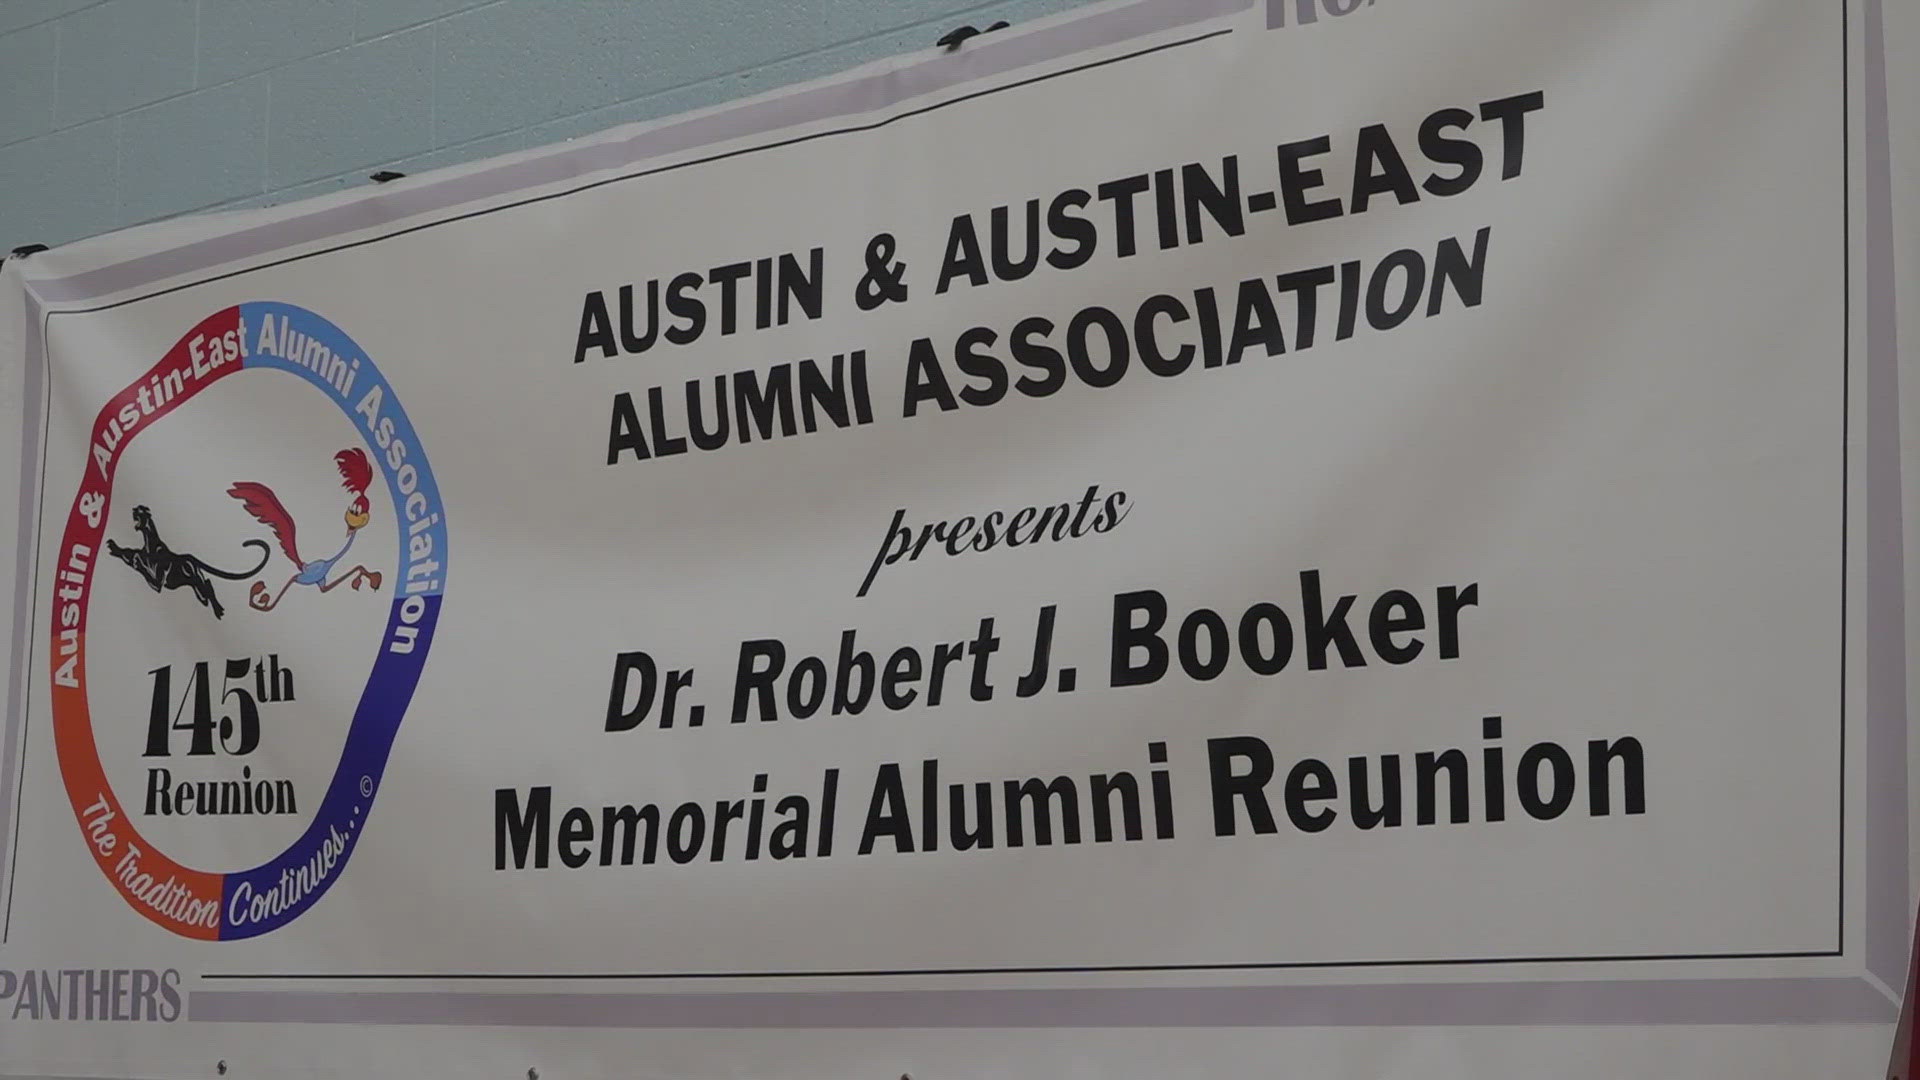 Generations of alumni, young and old, joined together on Friday to celebrate their alma mater.